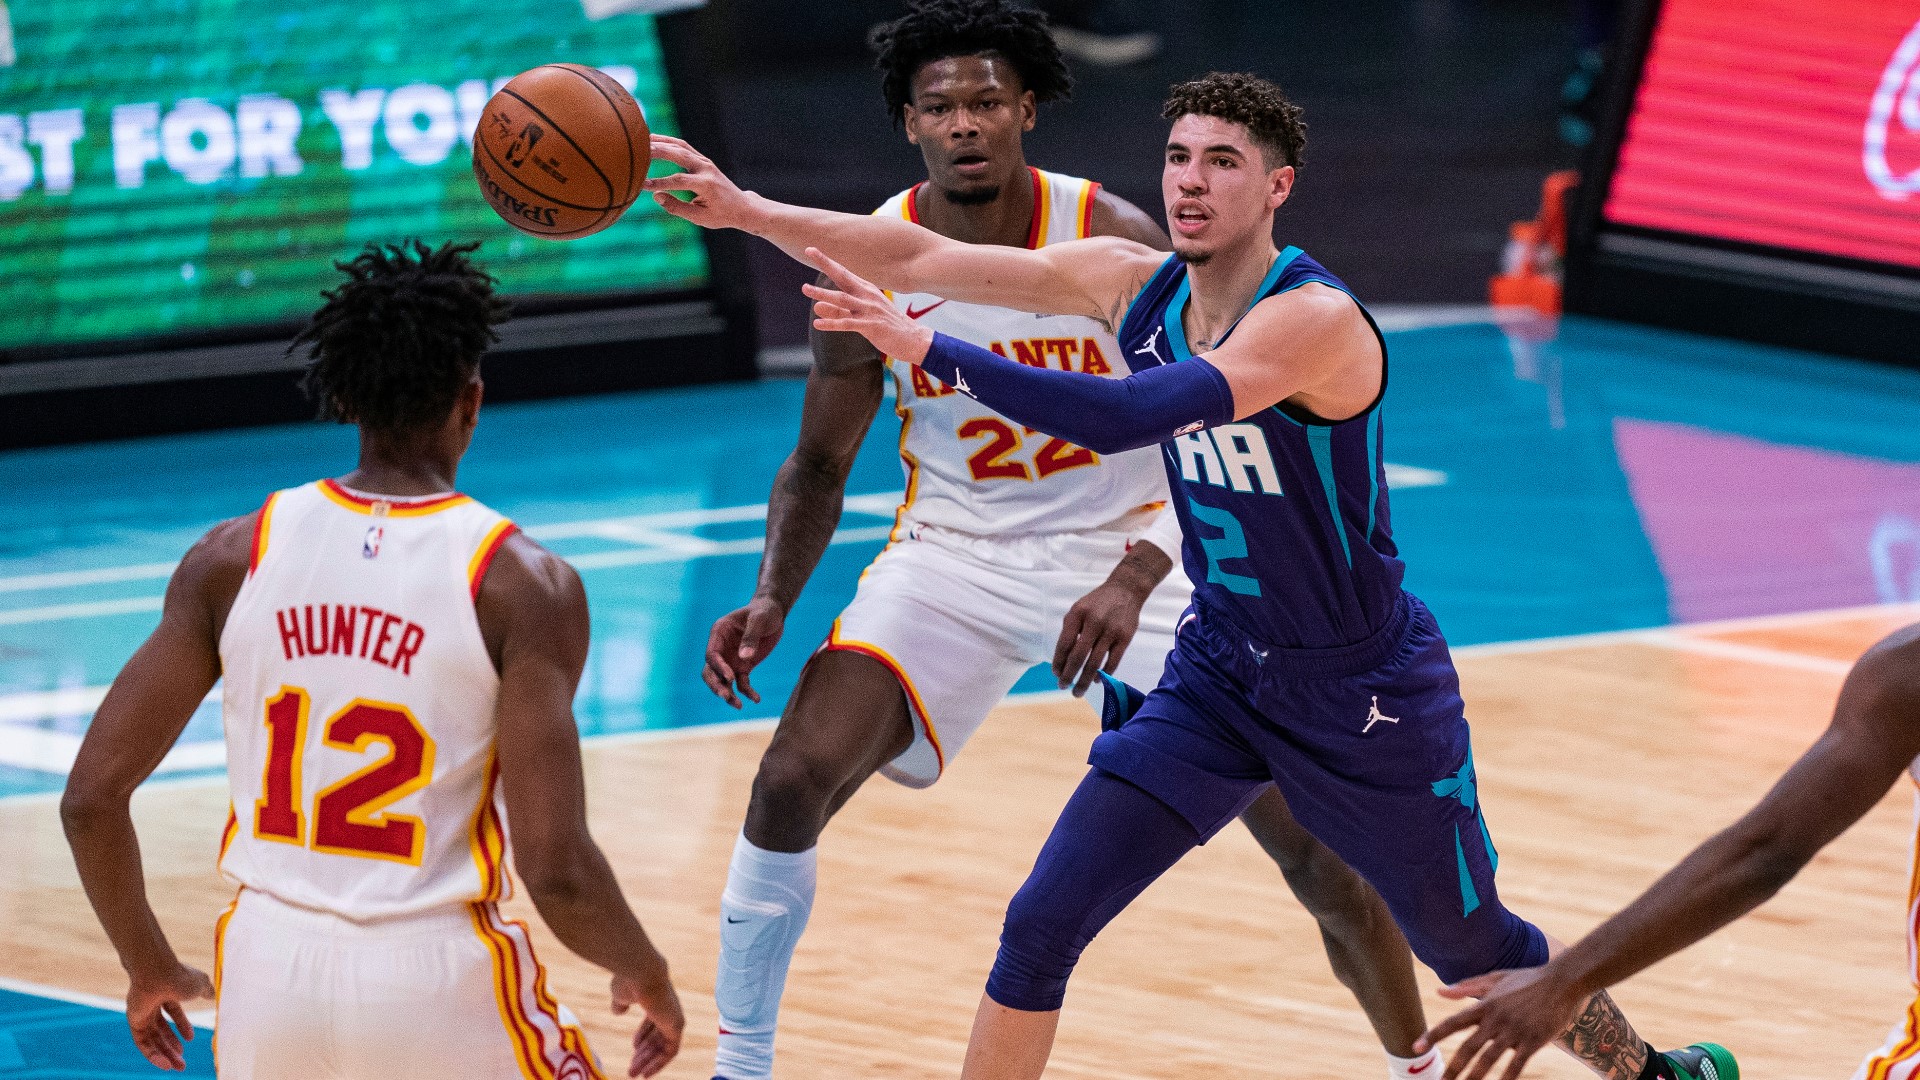 LaMelo Ball had 22 points, 12 rebounds and 11 assists to become youngest player in NBA history to record a triple-double, and the Hornets beat the Atlanta Hawks.